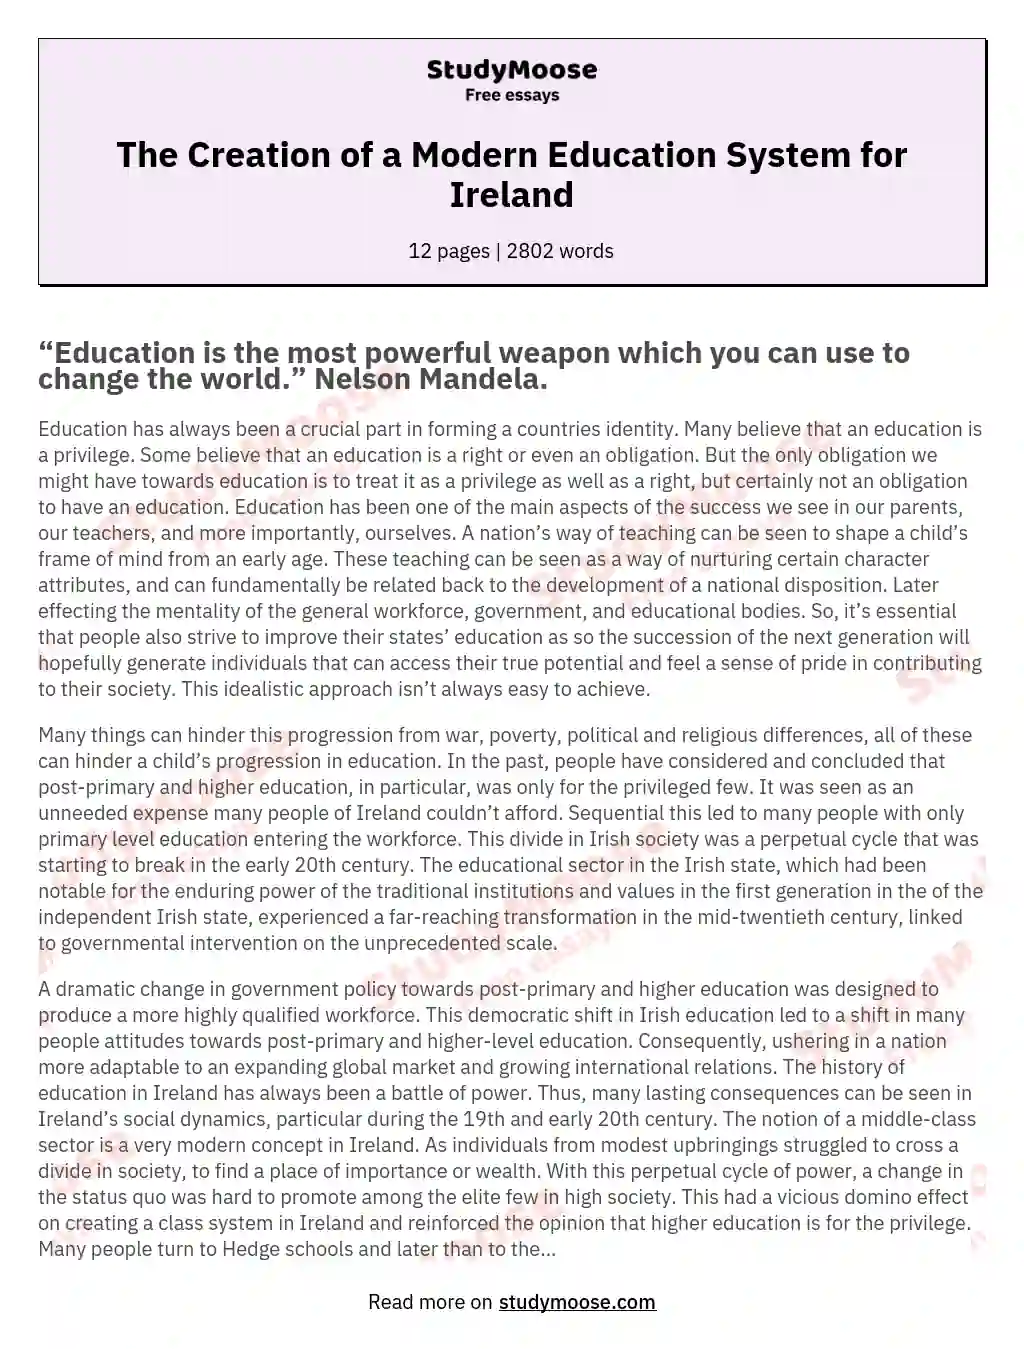 The Creation of a Modern Education System for Ireland essay